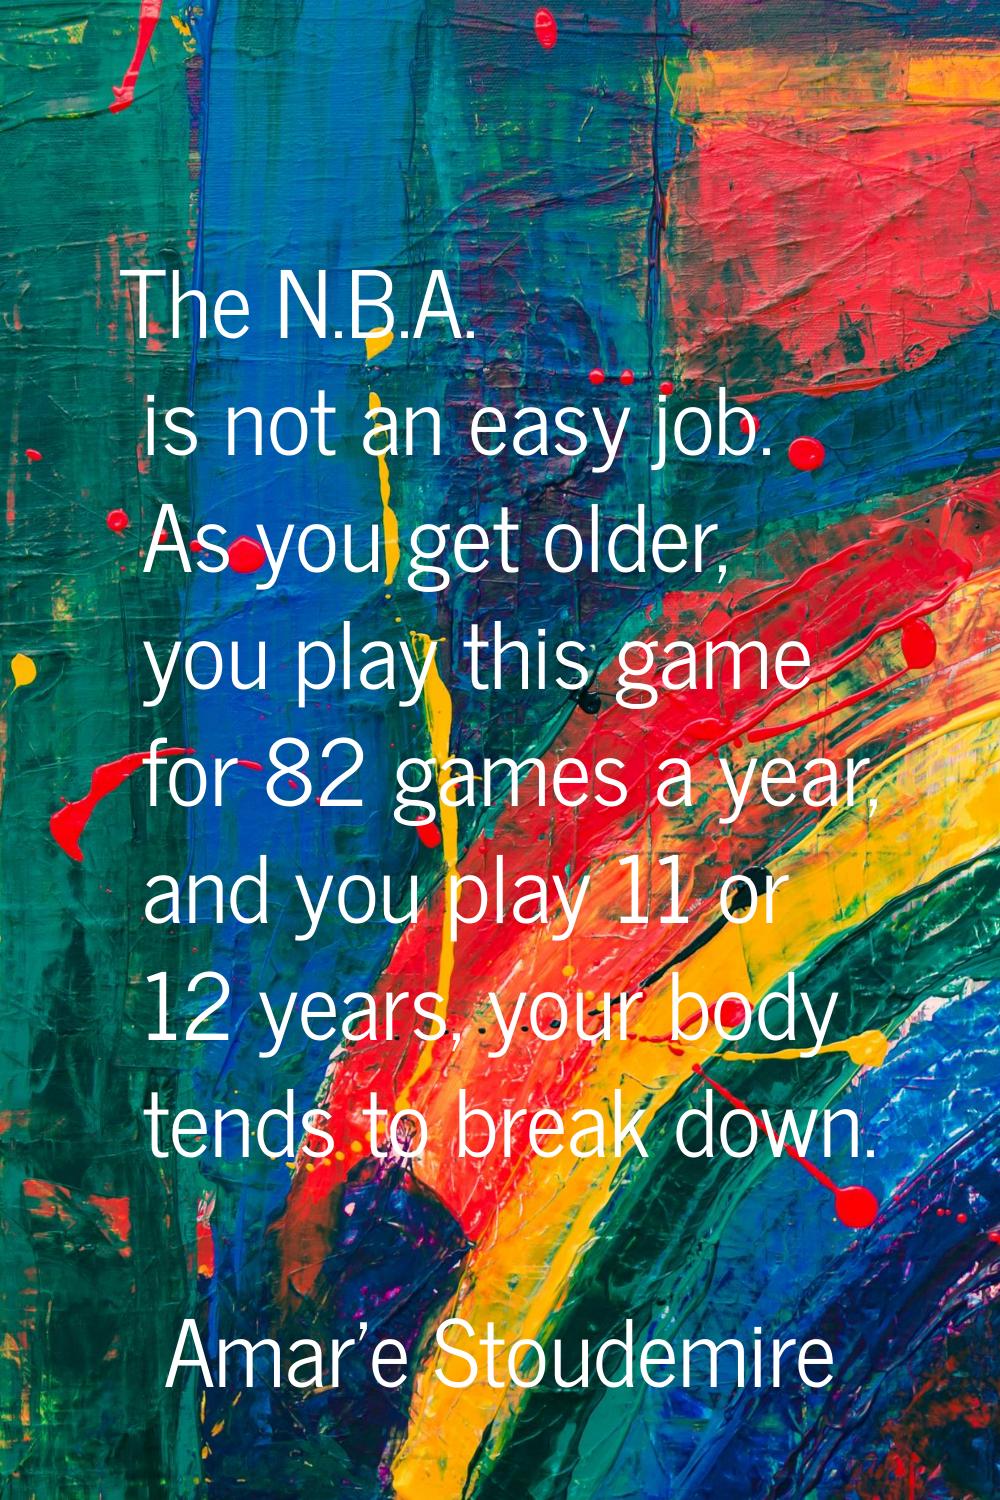 The N.B.A. is not an easy job. As you get older, you play this game for 82 games a year, and you pl